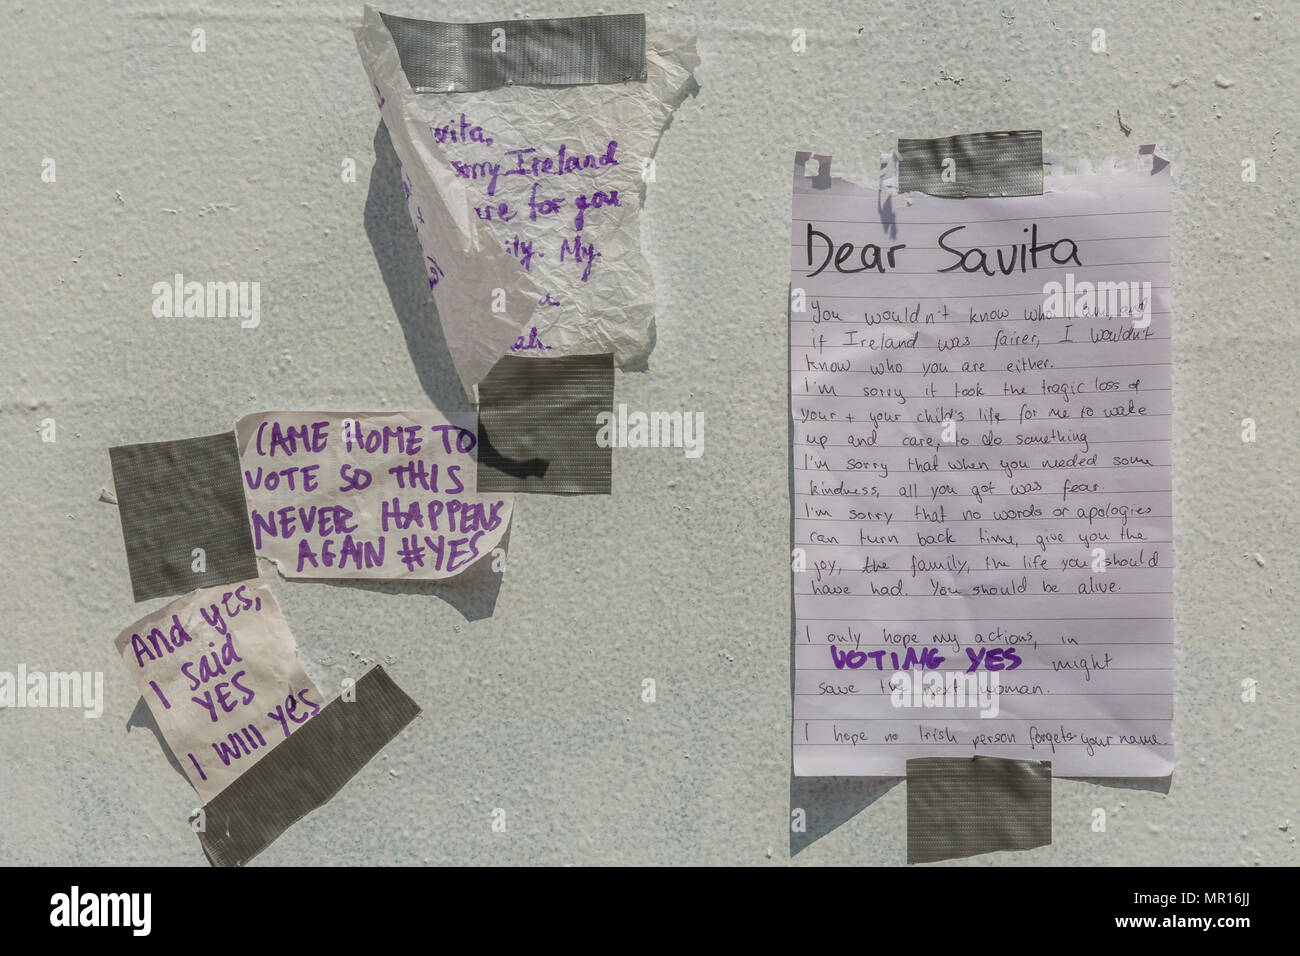 Dublin, Ireland. 25th May 2018. Hearfelt letters are penned to Savita at the memorial mural of Savita Halappanavar during the Irish Abortion Referendum 2018. Ireland are voting to repeal the 8th Amendment to the Irish Constitution. Credit: Butler Photographic/Alamy Live News Stock Photo